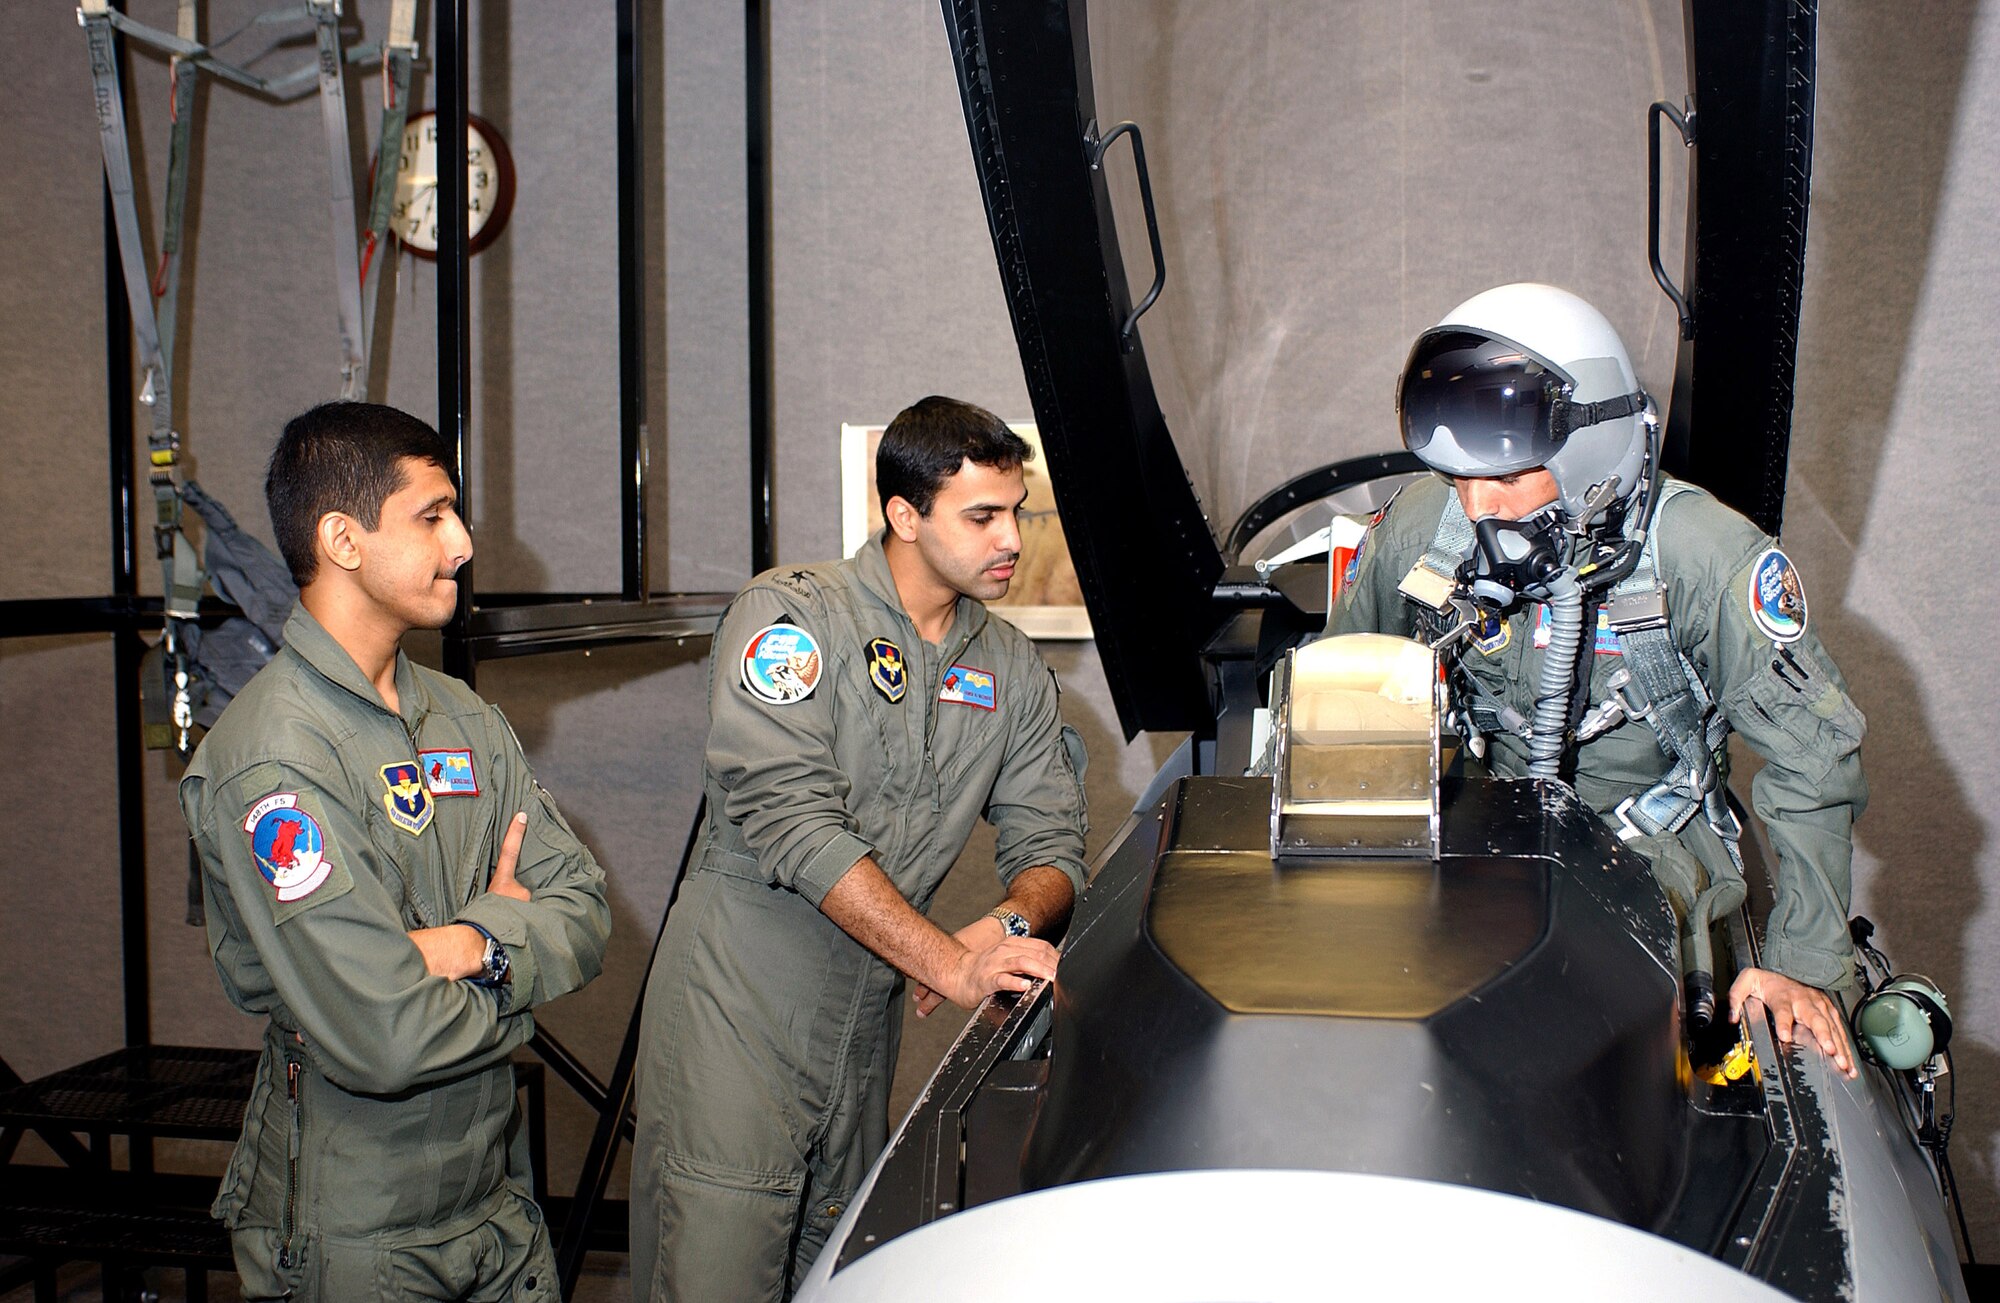 Three student pilots from the United Arab Emirates practice emergency egress procedures Aug. 1 as part of their F-16 Fighting Falcon flight training with the  Arizona Air National Guard's 162nd Fighter Wing in Tucson, Ariz. (U.S. Air Force photo/Master Sgt. Dave Neve)